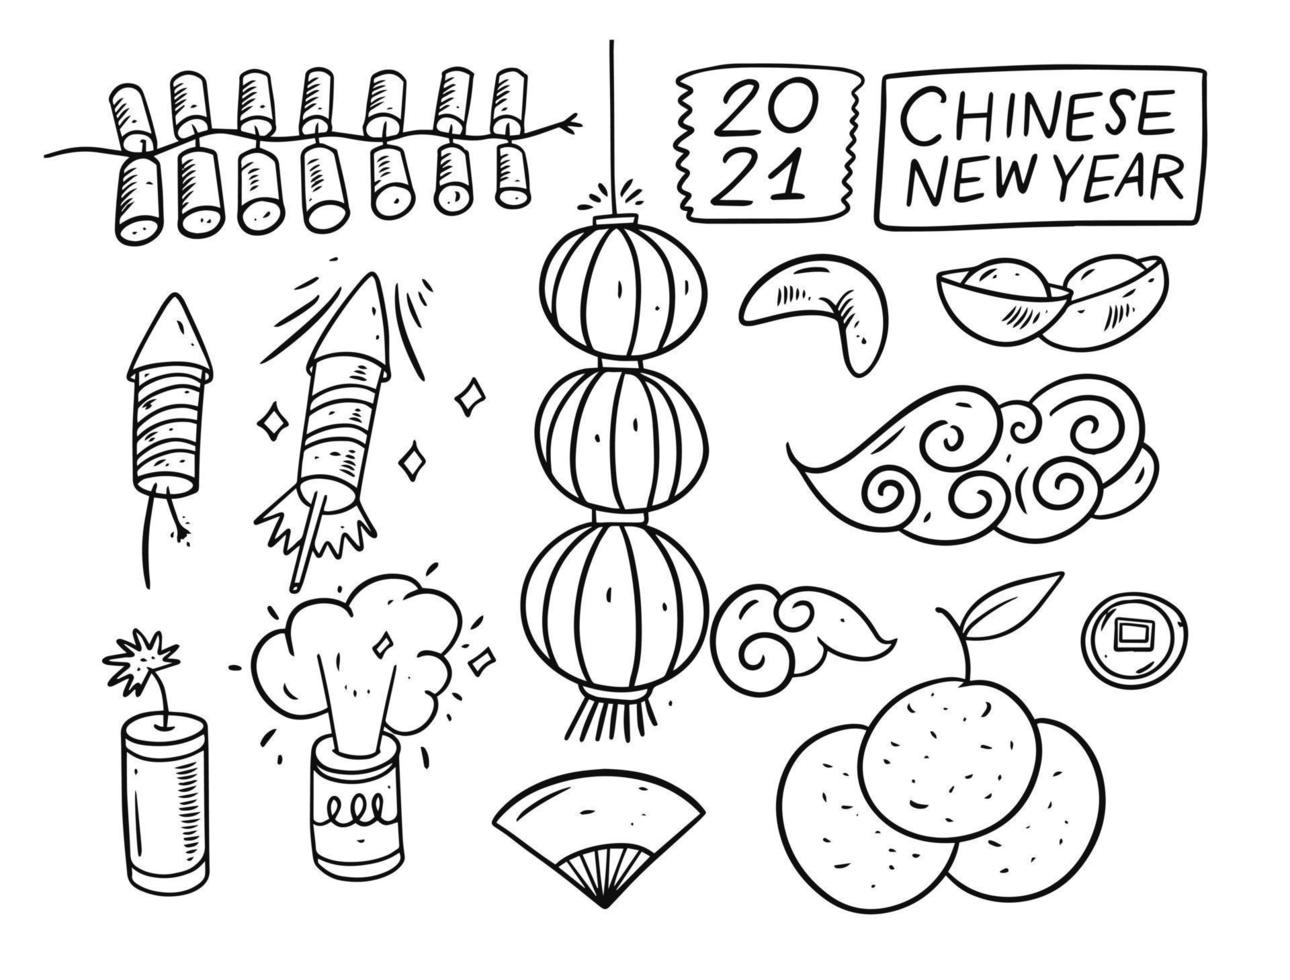 Hand draw Chinese New Year black color elements. Sketch style vector illustration.